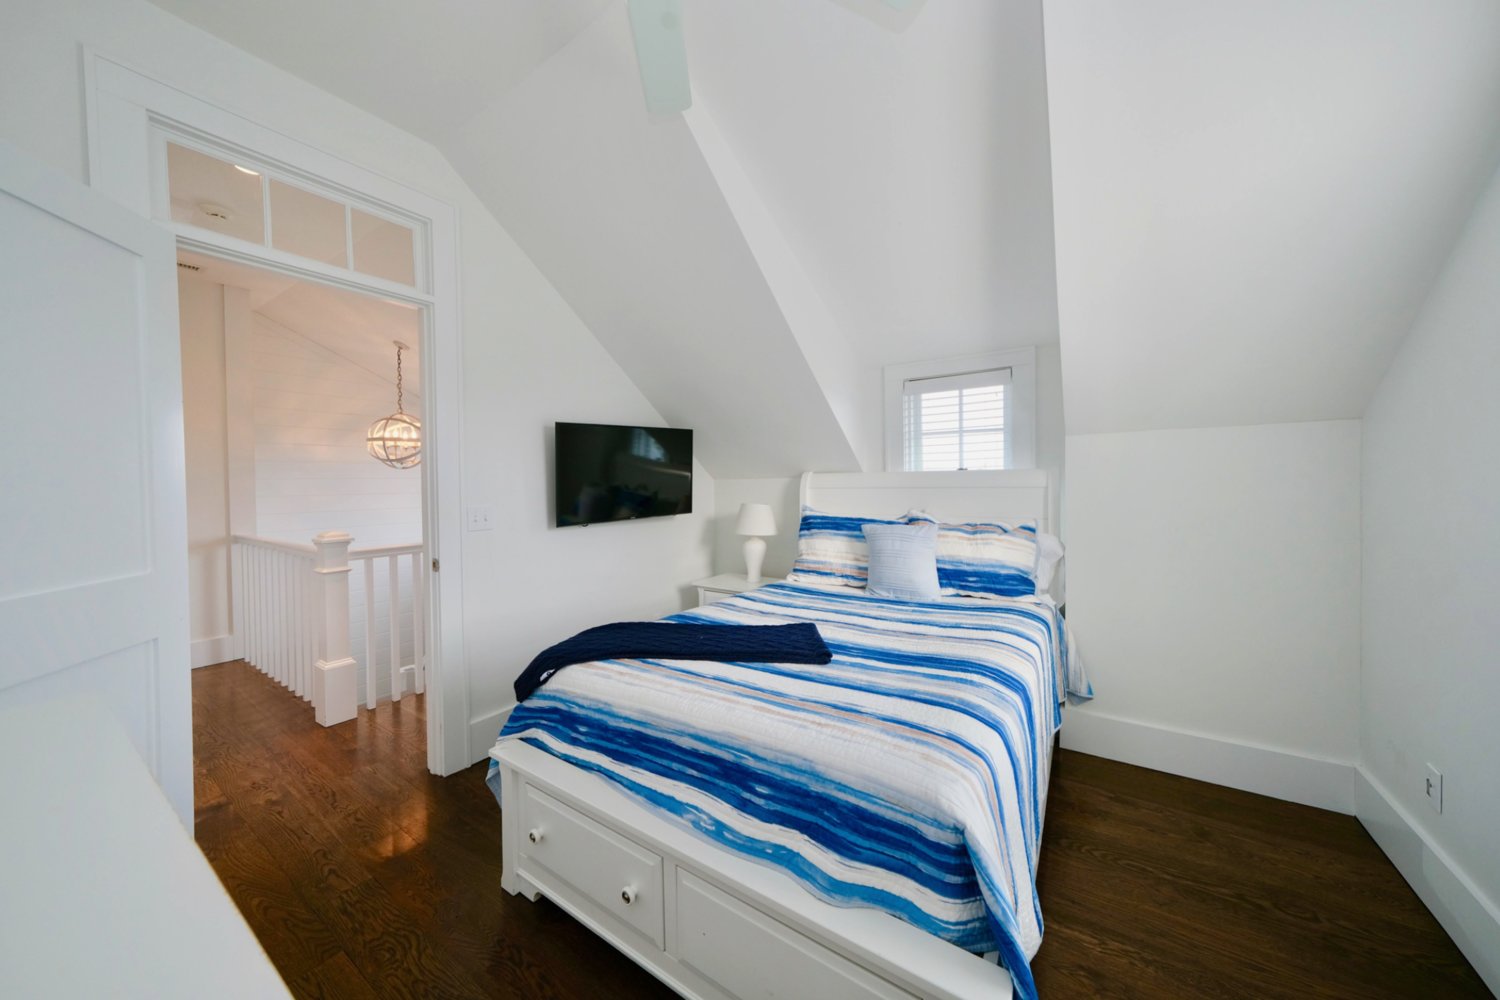 This second-floor bedroom has wood floors and a vaulted ceiling.